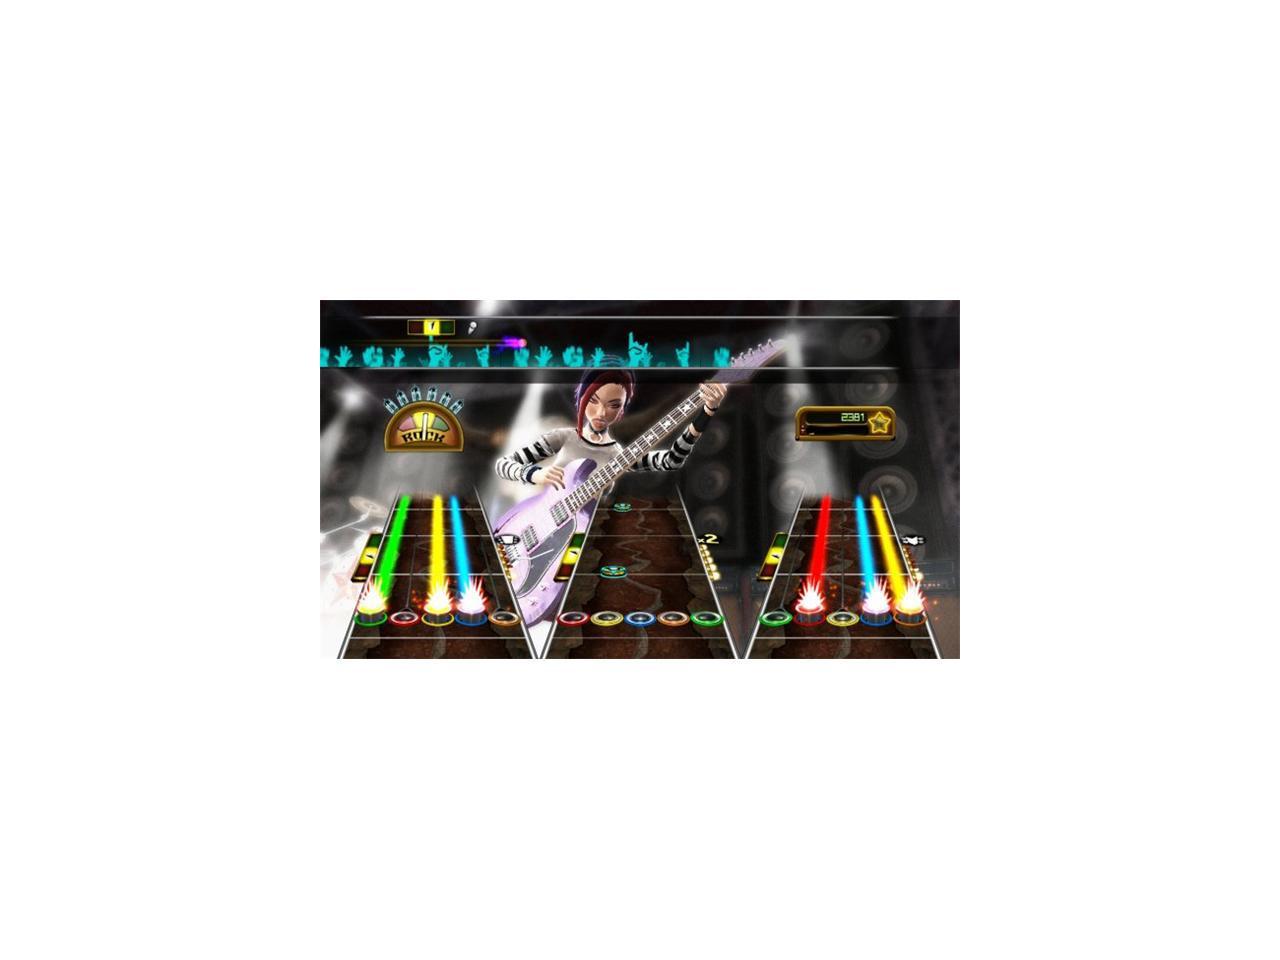 can i play pc guitar for guitar hero on wii